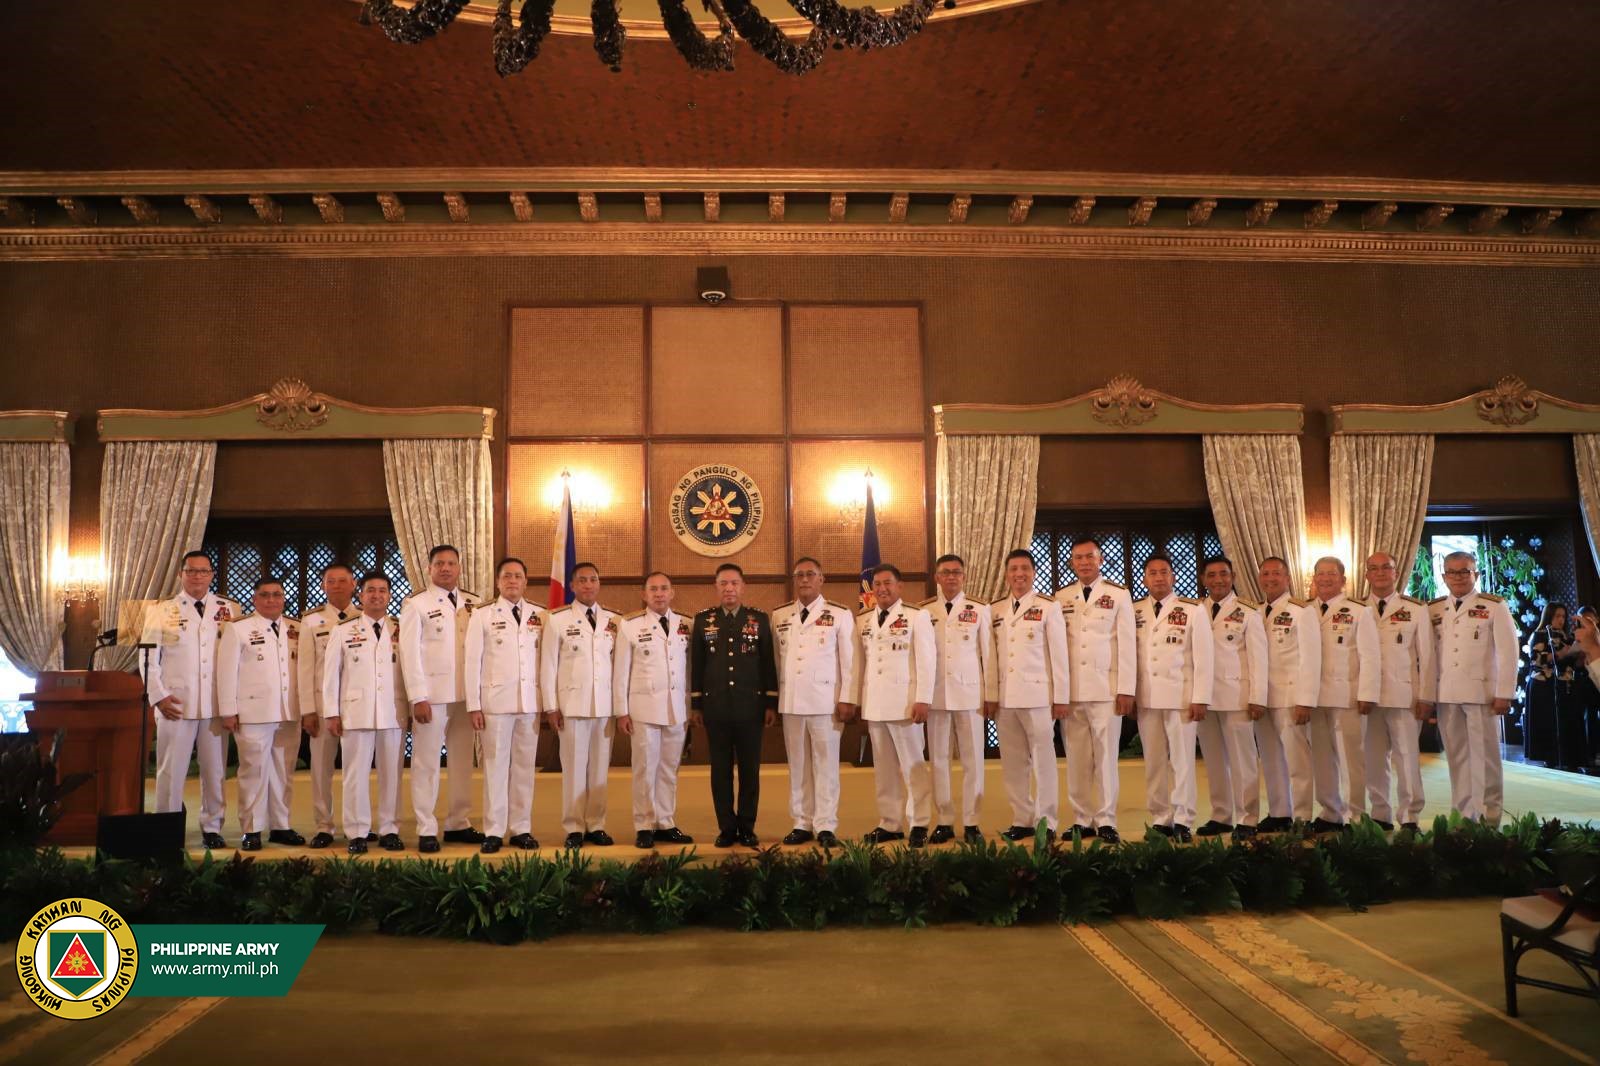 21 newly promoted Philippine Army generals ready to serve and take bigger responsibilities